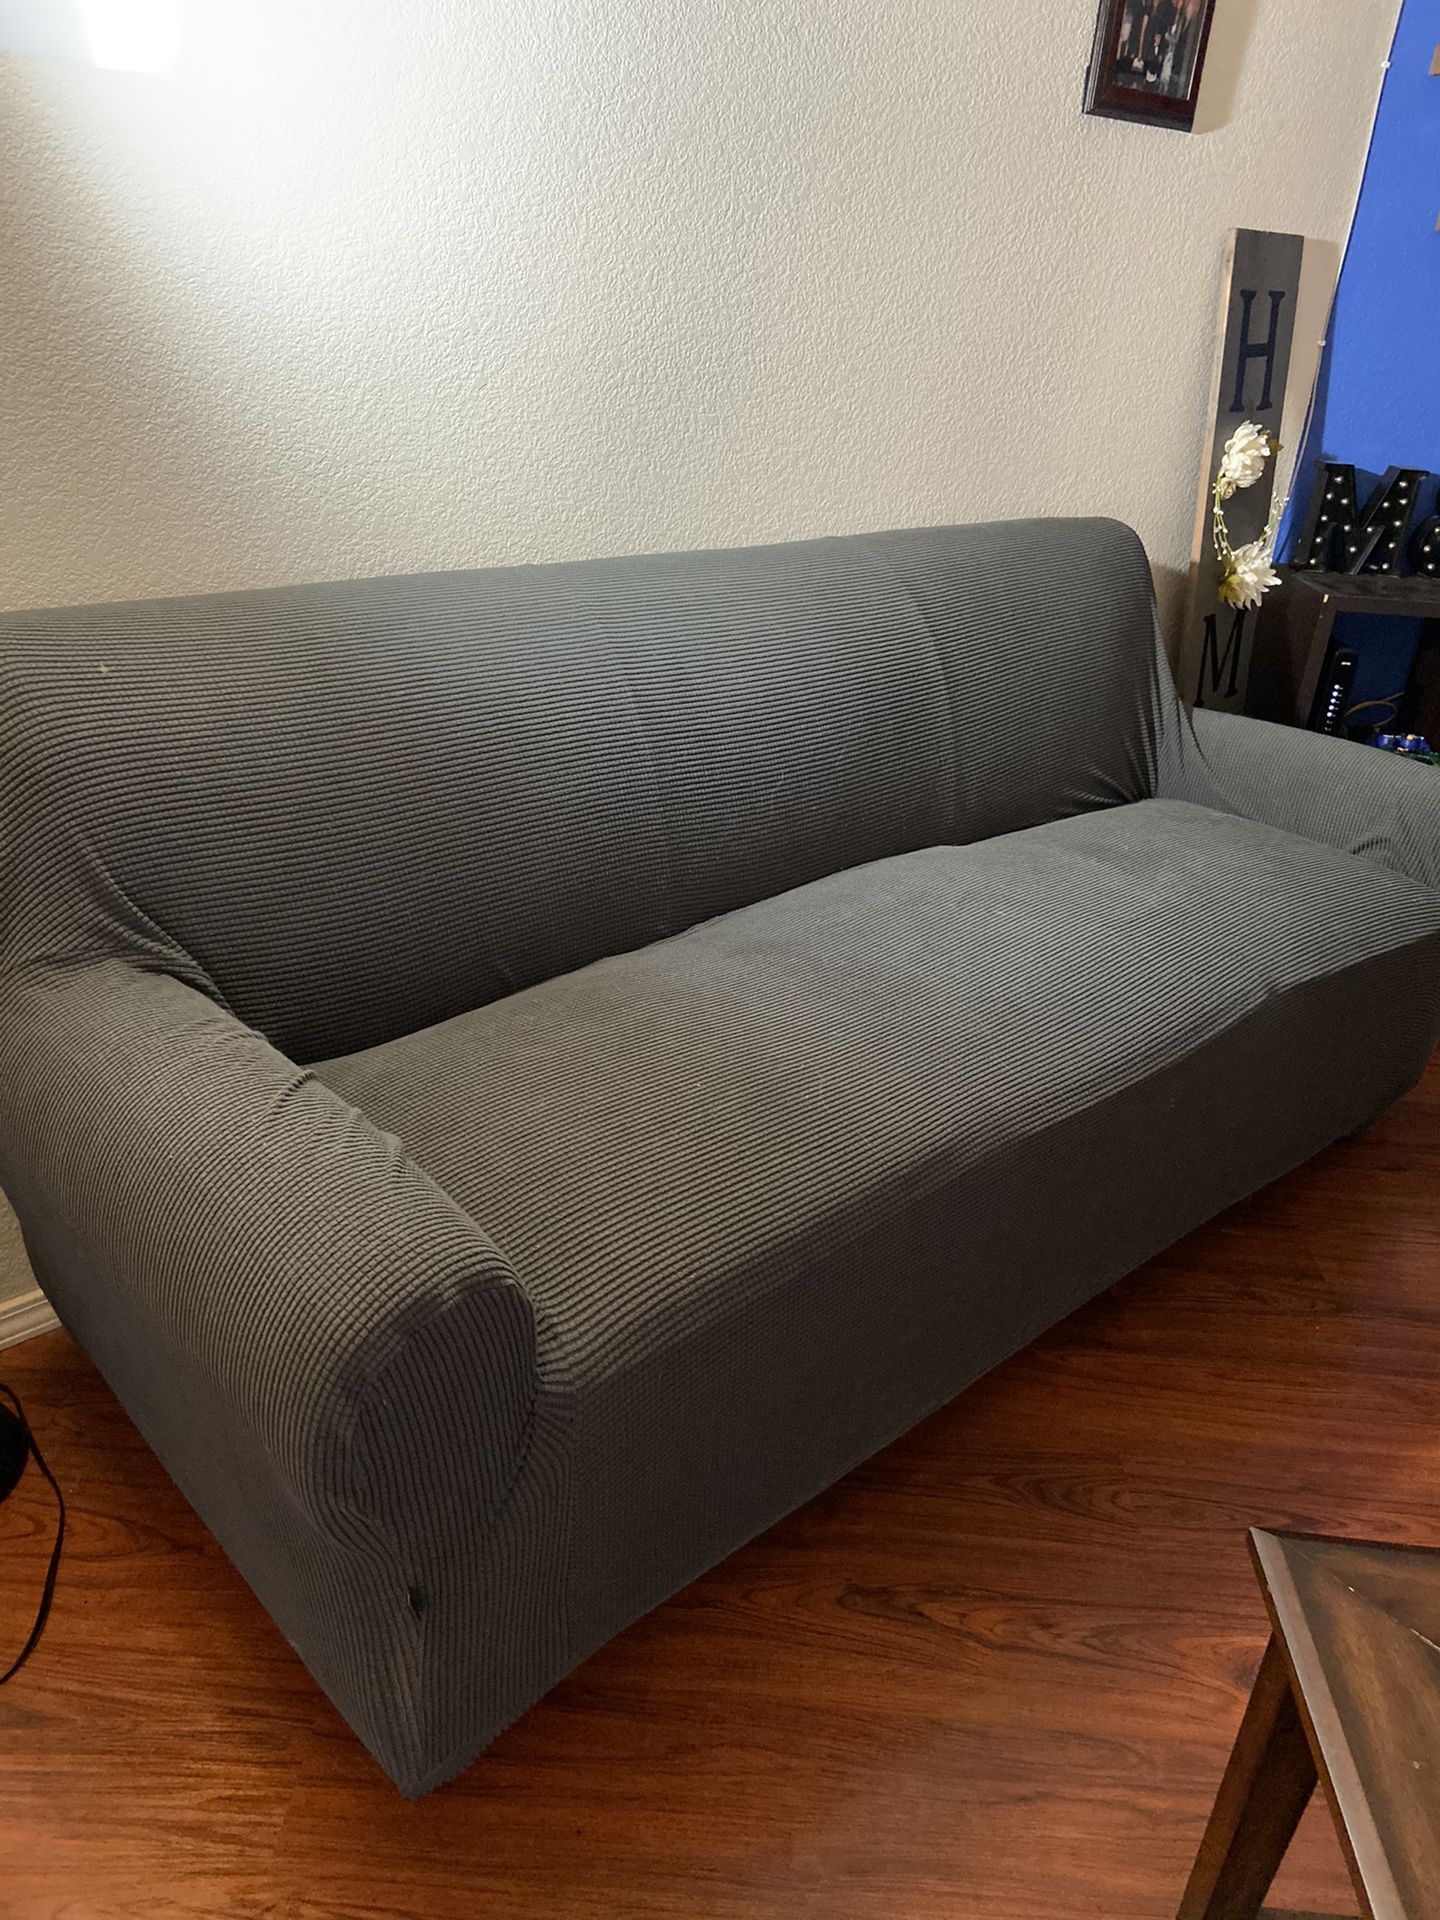 Couch 84.5”x 36”